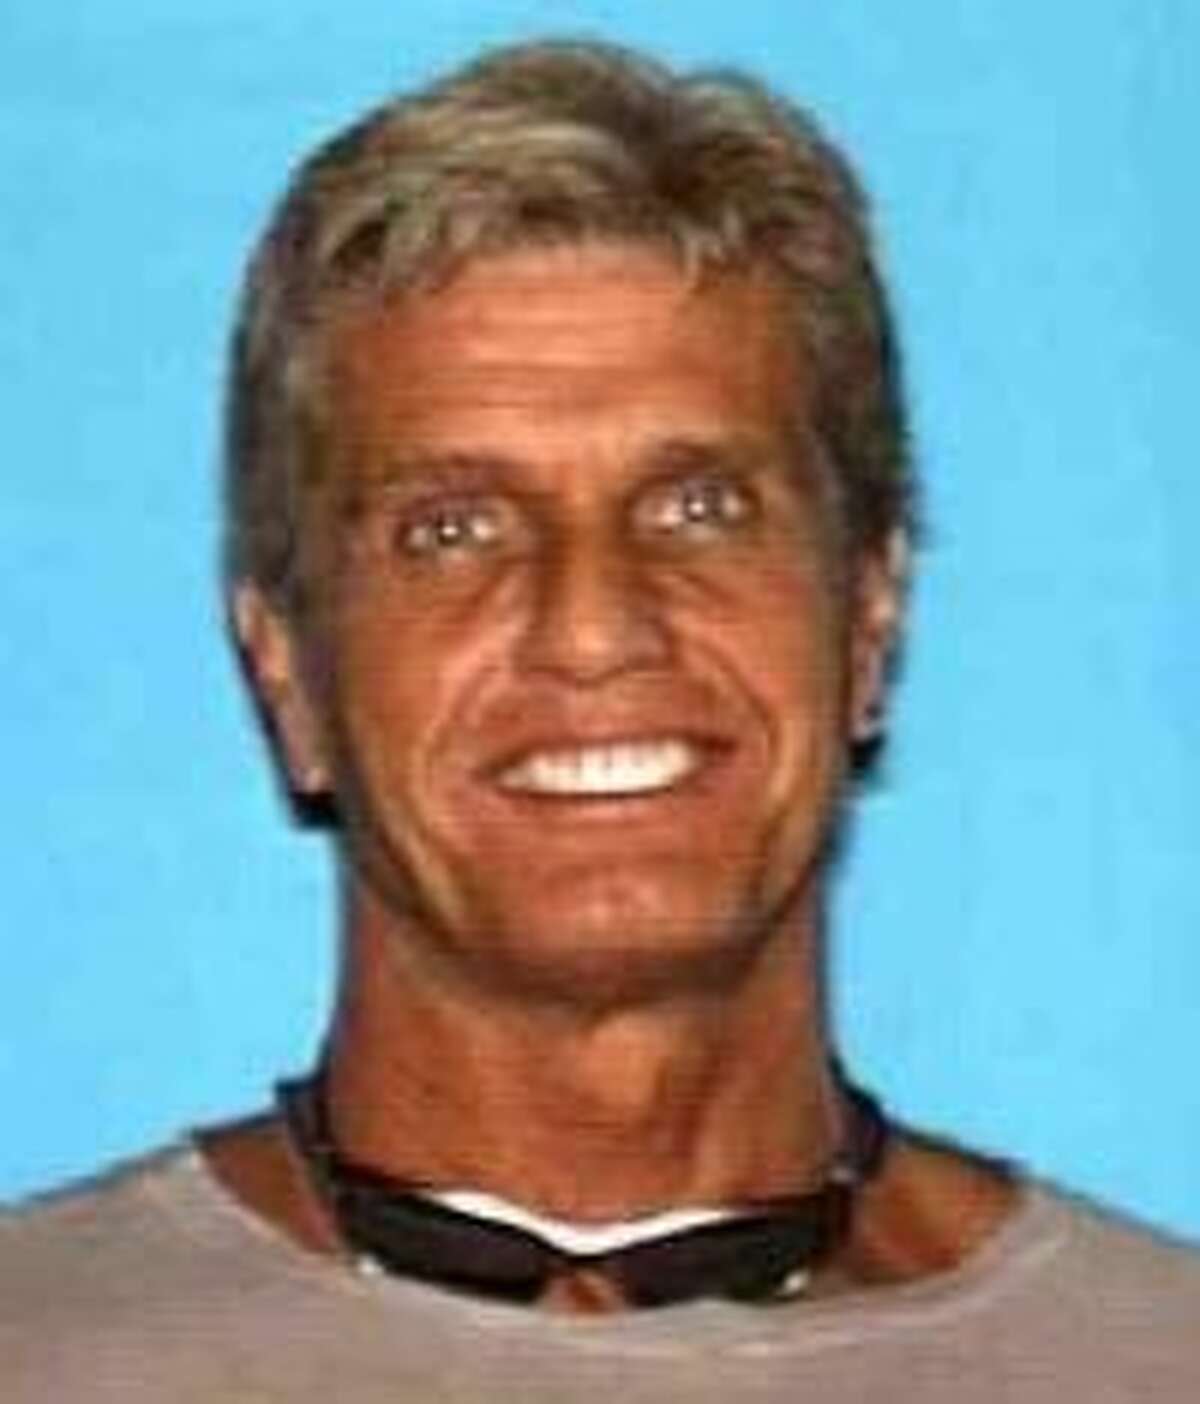 This photo released by the Los Angeles County Sheriffís Department shows missing 20th Century Fox executive Gavin Smith who was last seen May 1, 2012. The Los Angeles County coroner’s office confirmed early Thursday Nov. 6, 2014 that the remains of Gavin Smith have been positively identified.